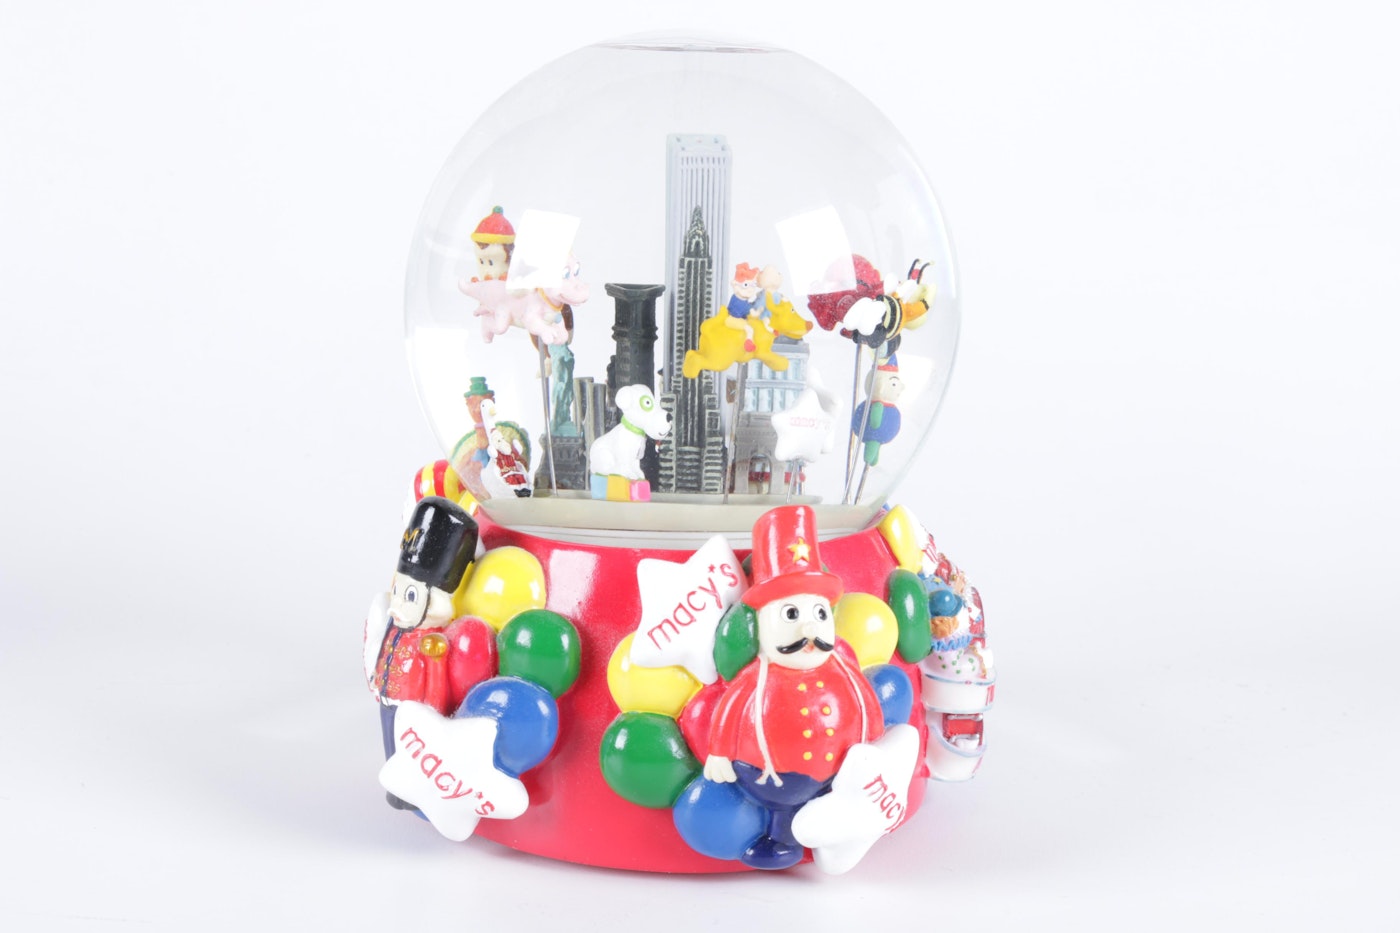 Pair of Macy's Thanksgiving Day Parade Snow Globes EBTH